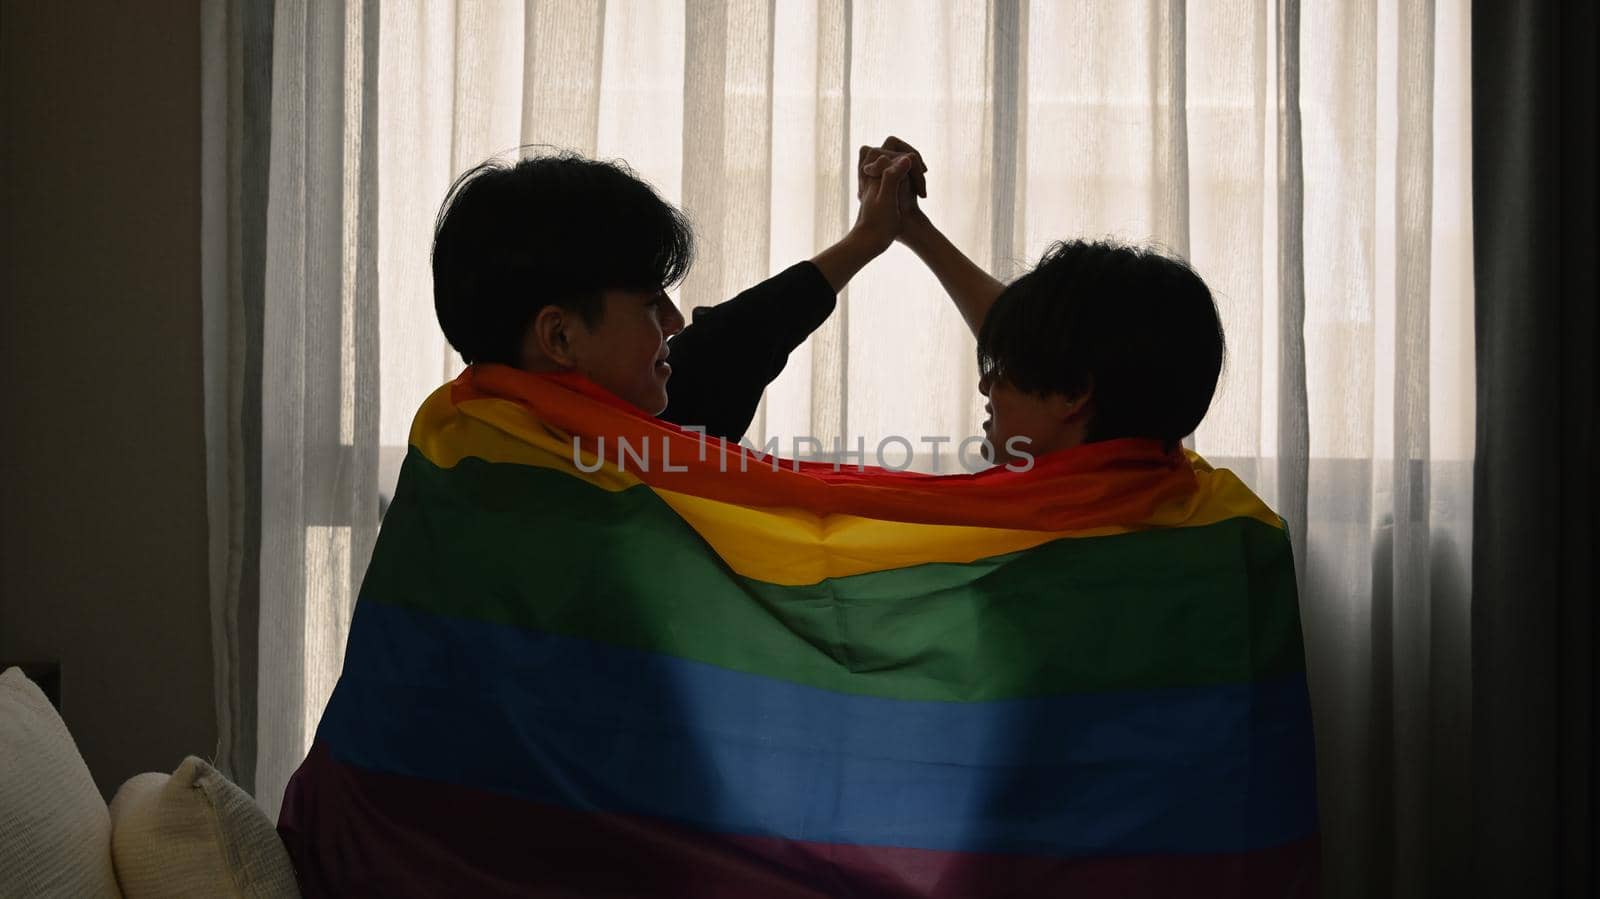 Happy gay couple expressing their love to each other under LGBTQ pride flag. Concept of sexual freedom and equal rights for LGBT community by prathanchorruangsak